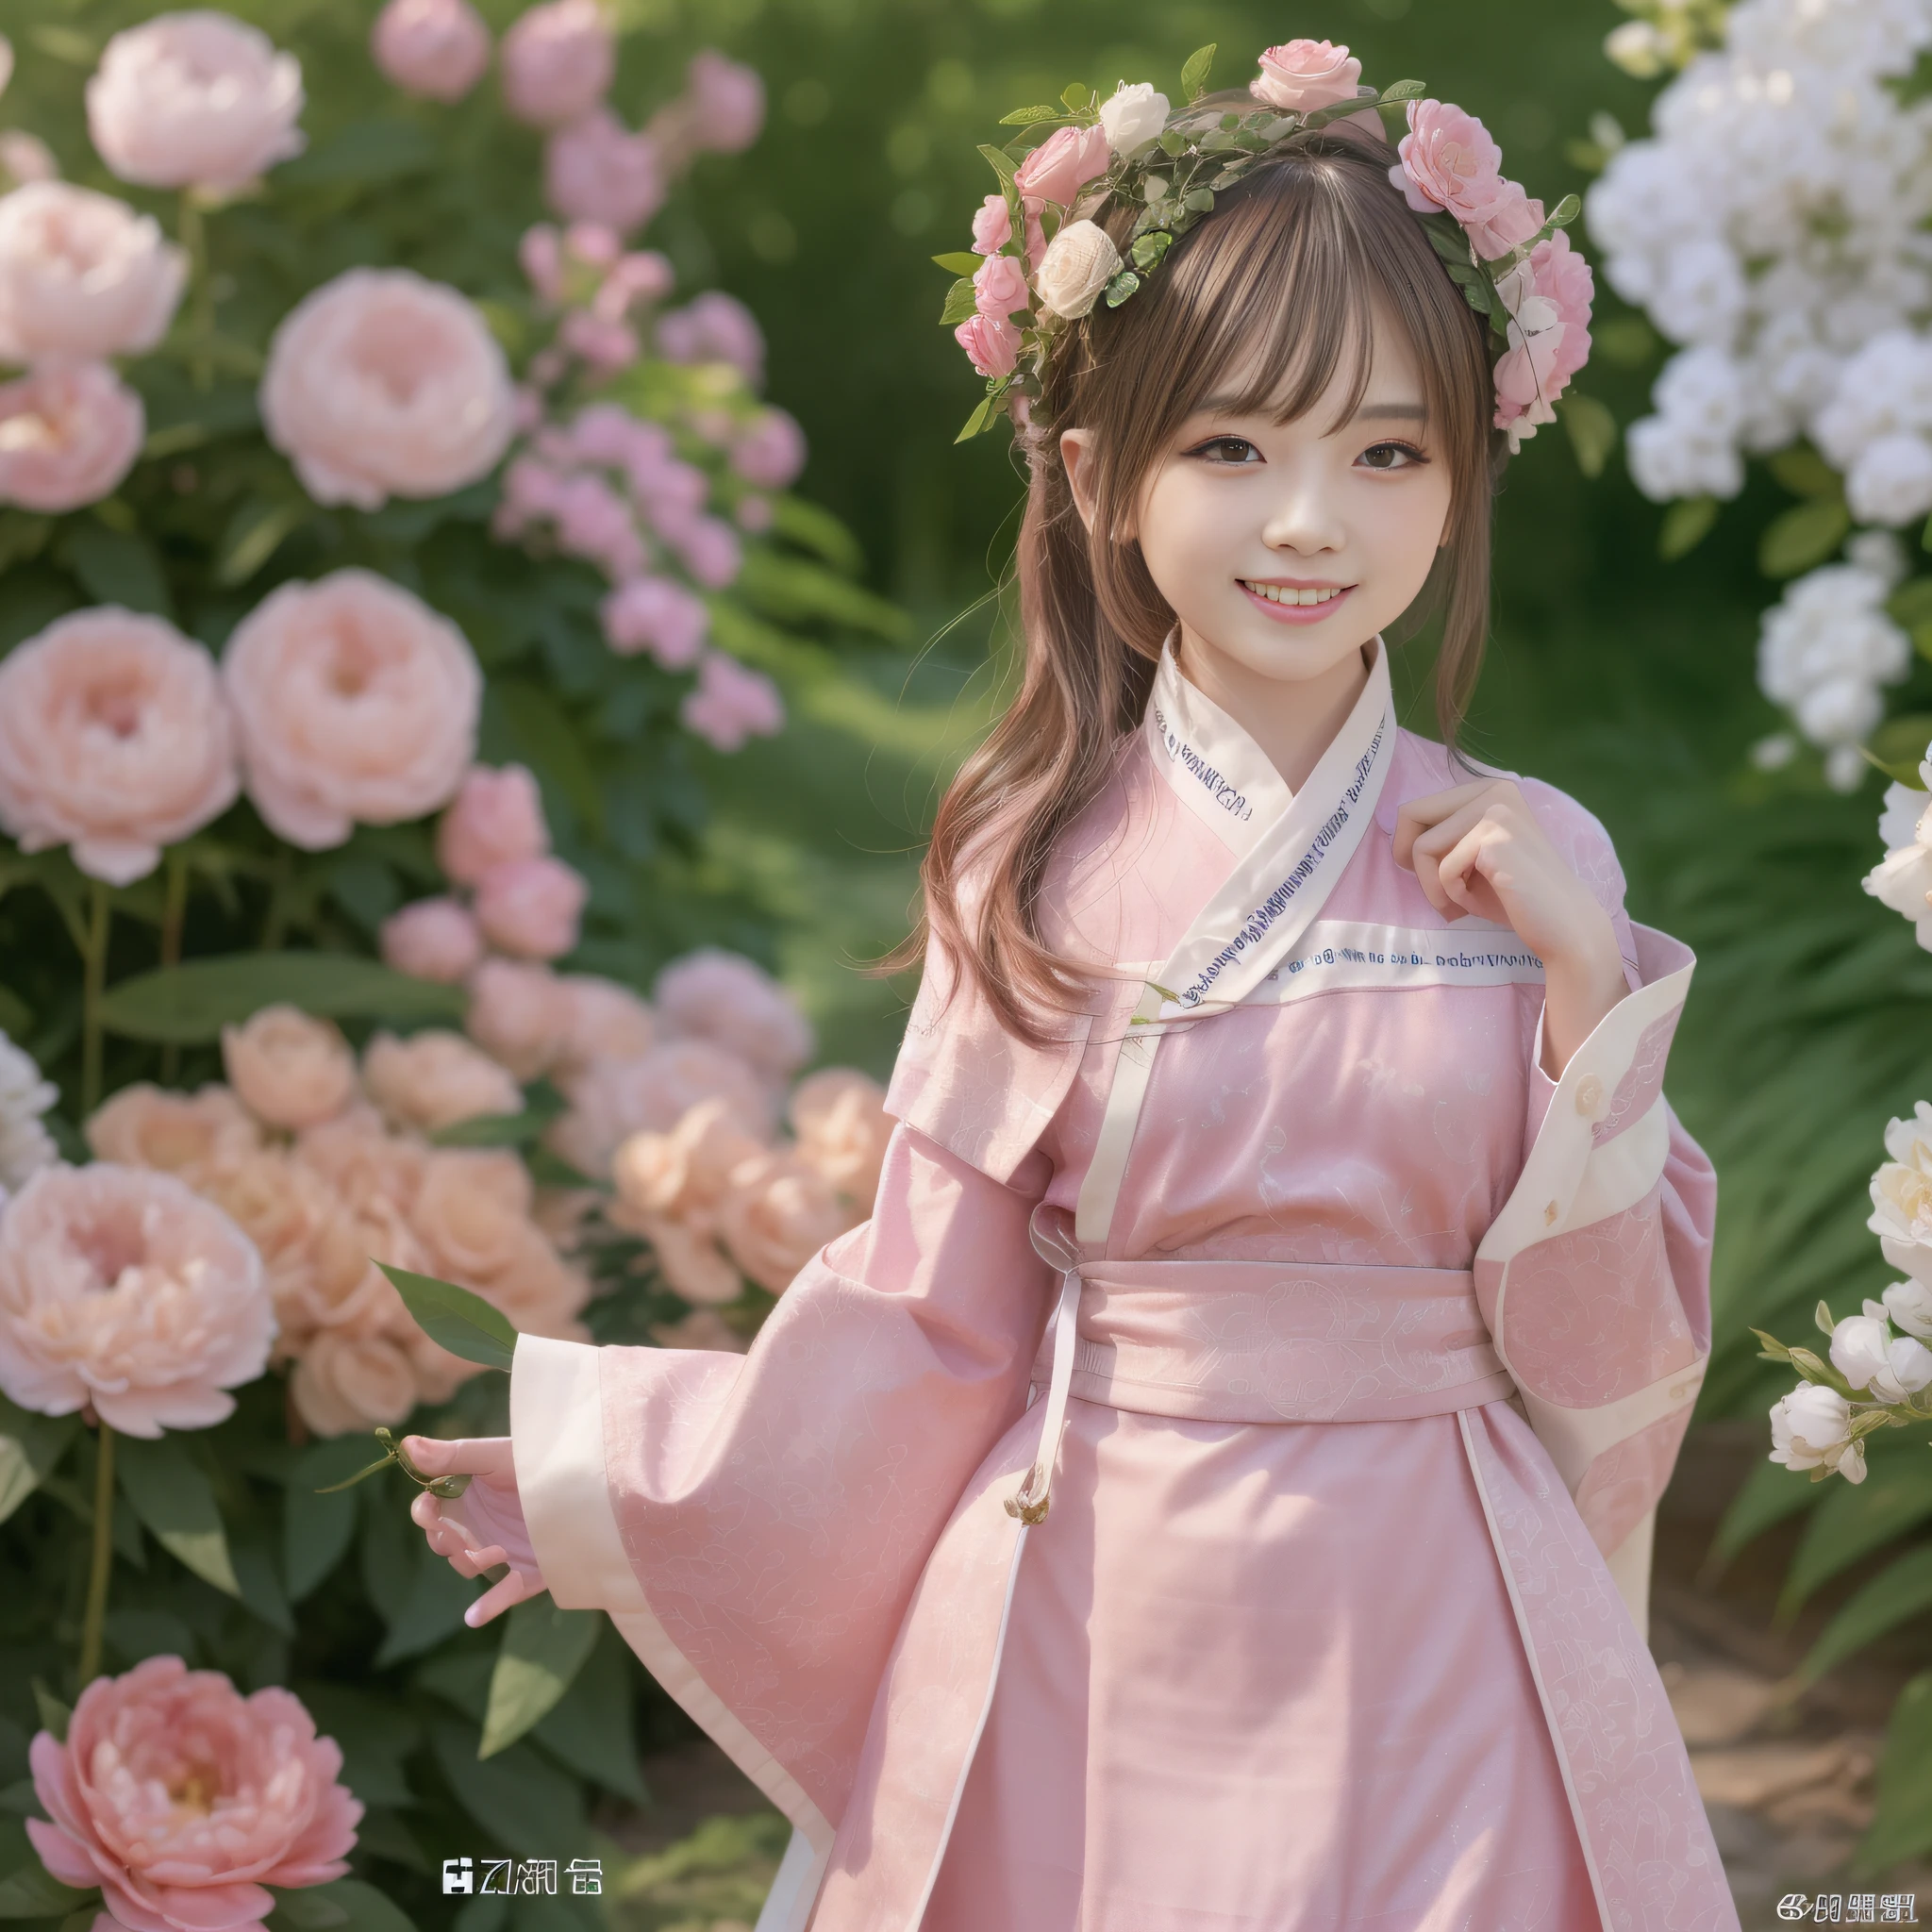 Extremely detailed CG Unity 8k wallpaper, best lighting, super detail, best quality, high resolution, ethnic style girl, soft light, beautiful hair, pink and white hanfu costume, open space, white silk, bright colors, smile, standing among peony bushes